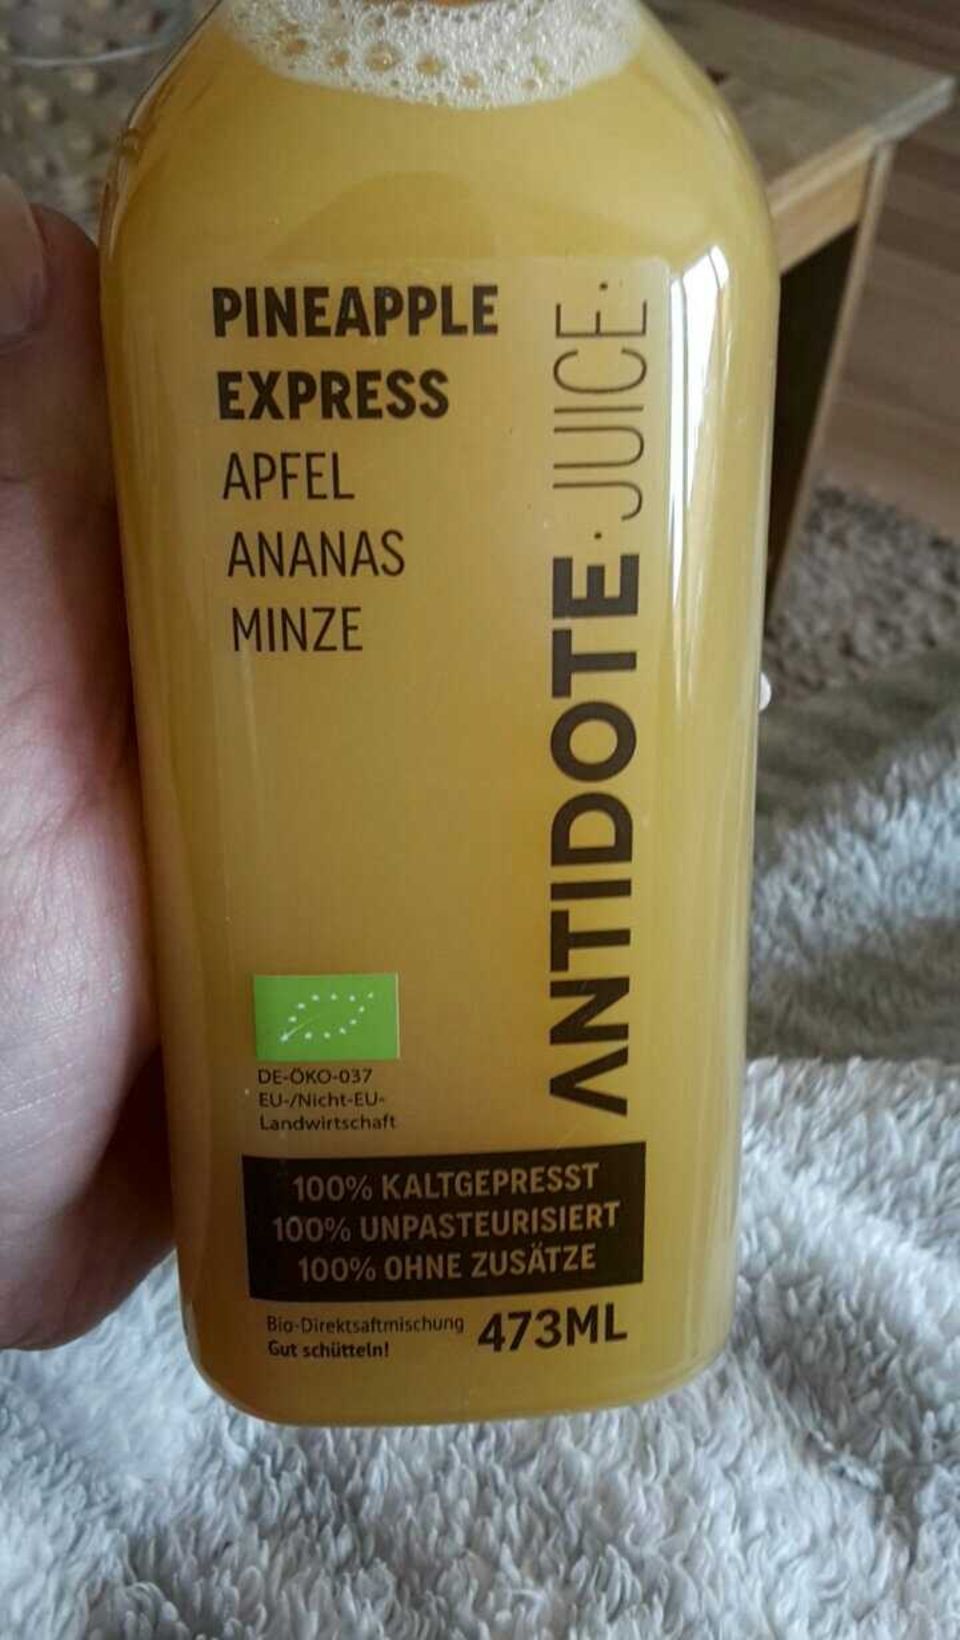 detox-test, antidote, cleanse, pineapple express